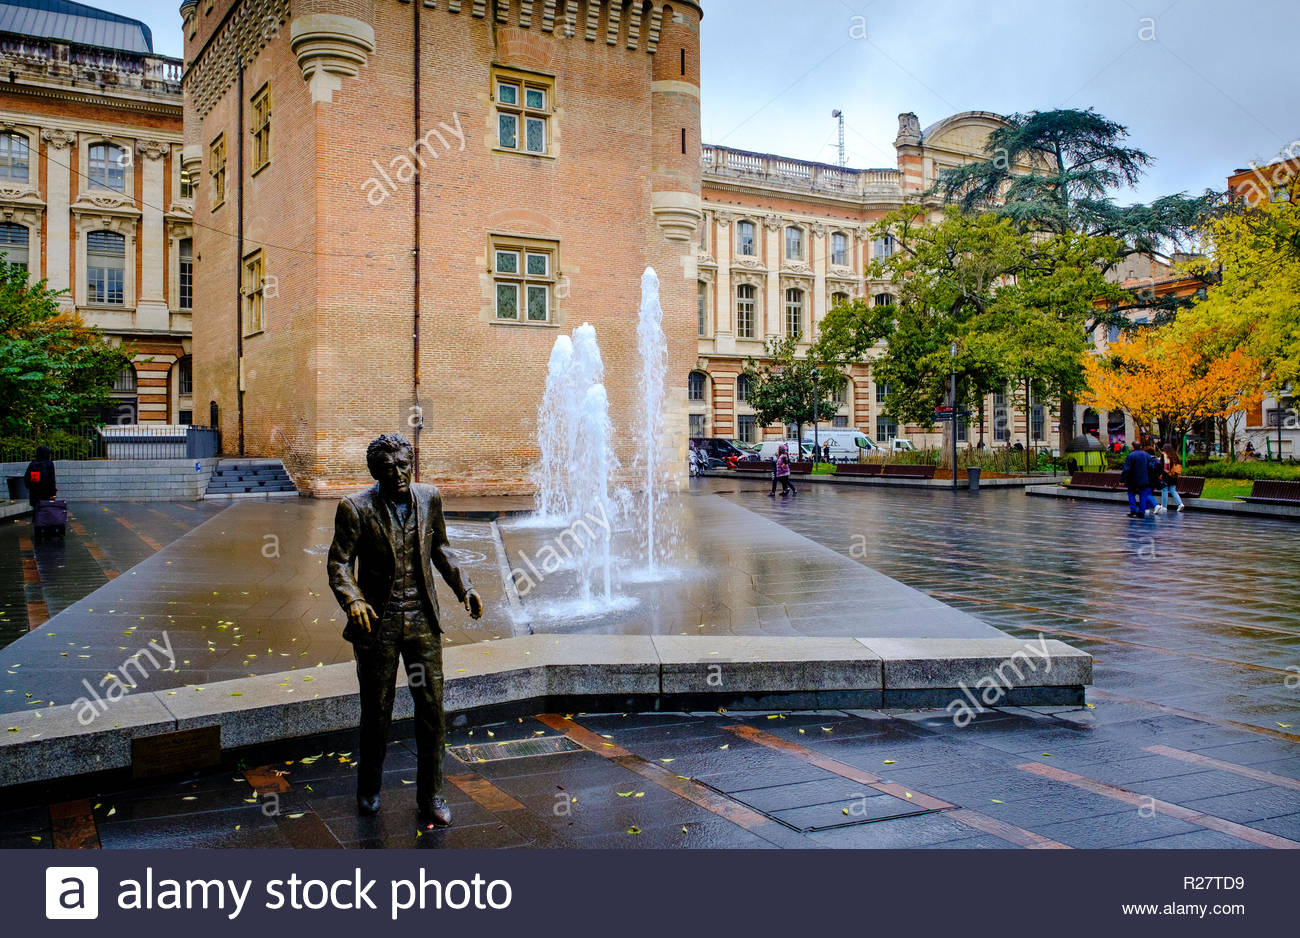 statue of french singer songwriter claude nougaro in the place charles de gaulle toulouse france R27TD9